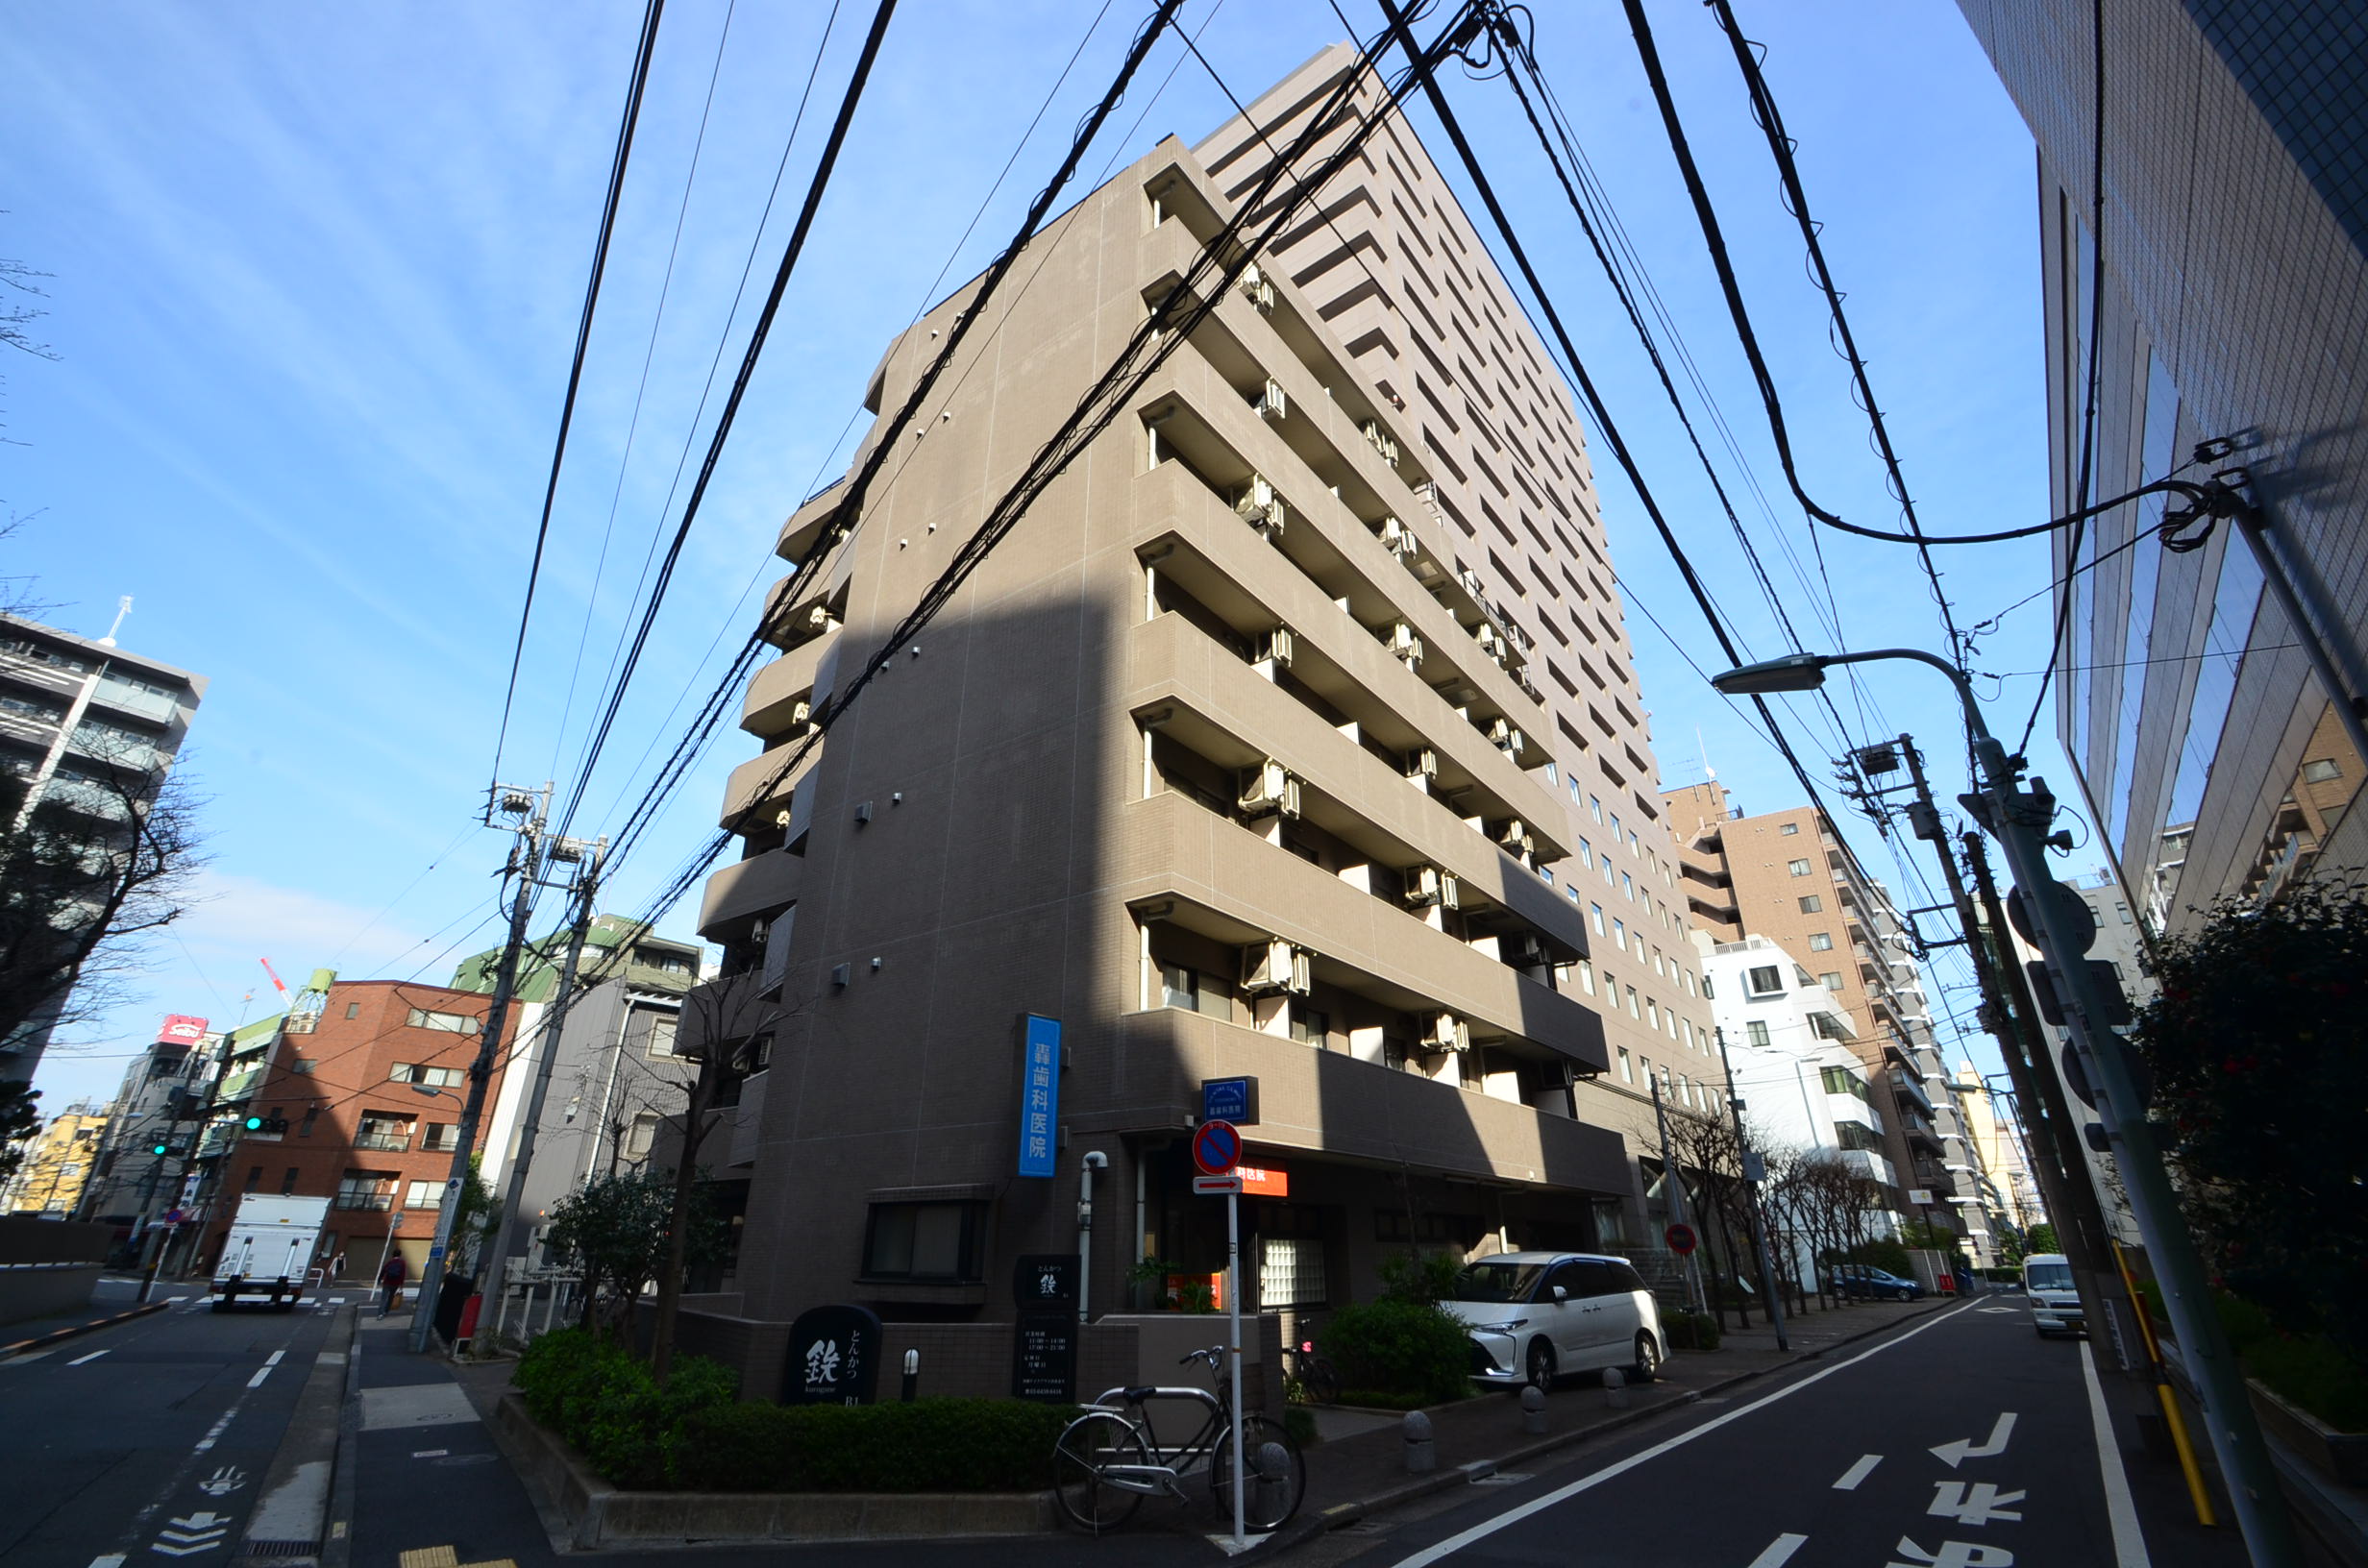 7822Tohto Monthly Welt Meguro Nishi 【Free WiFi, Bathroom/Toilet Separate】 Easy to apply with your smartphone with Tohto!